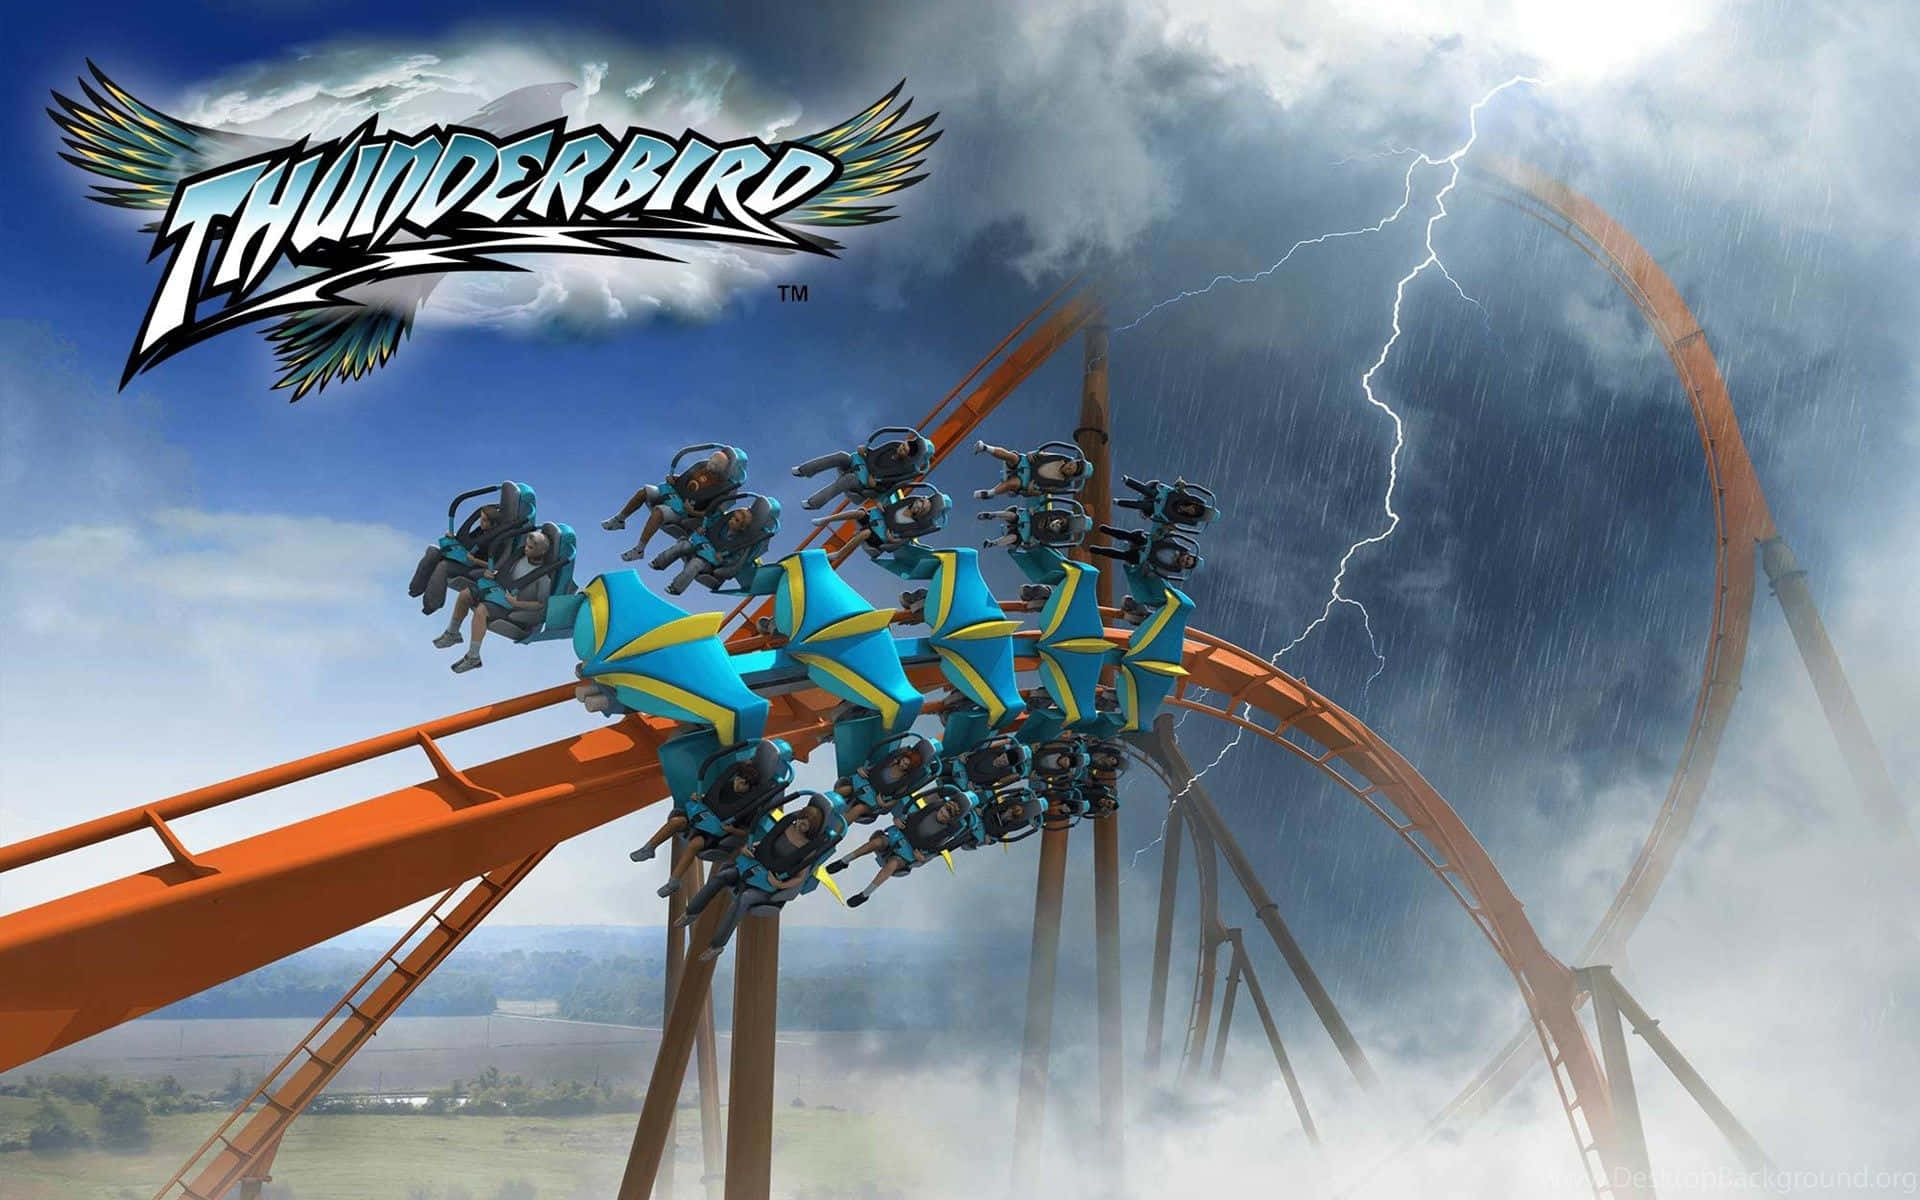 Experience the thrill of the ride on a thrilling roller coaster